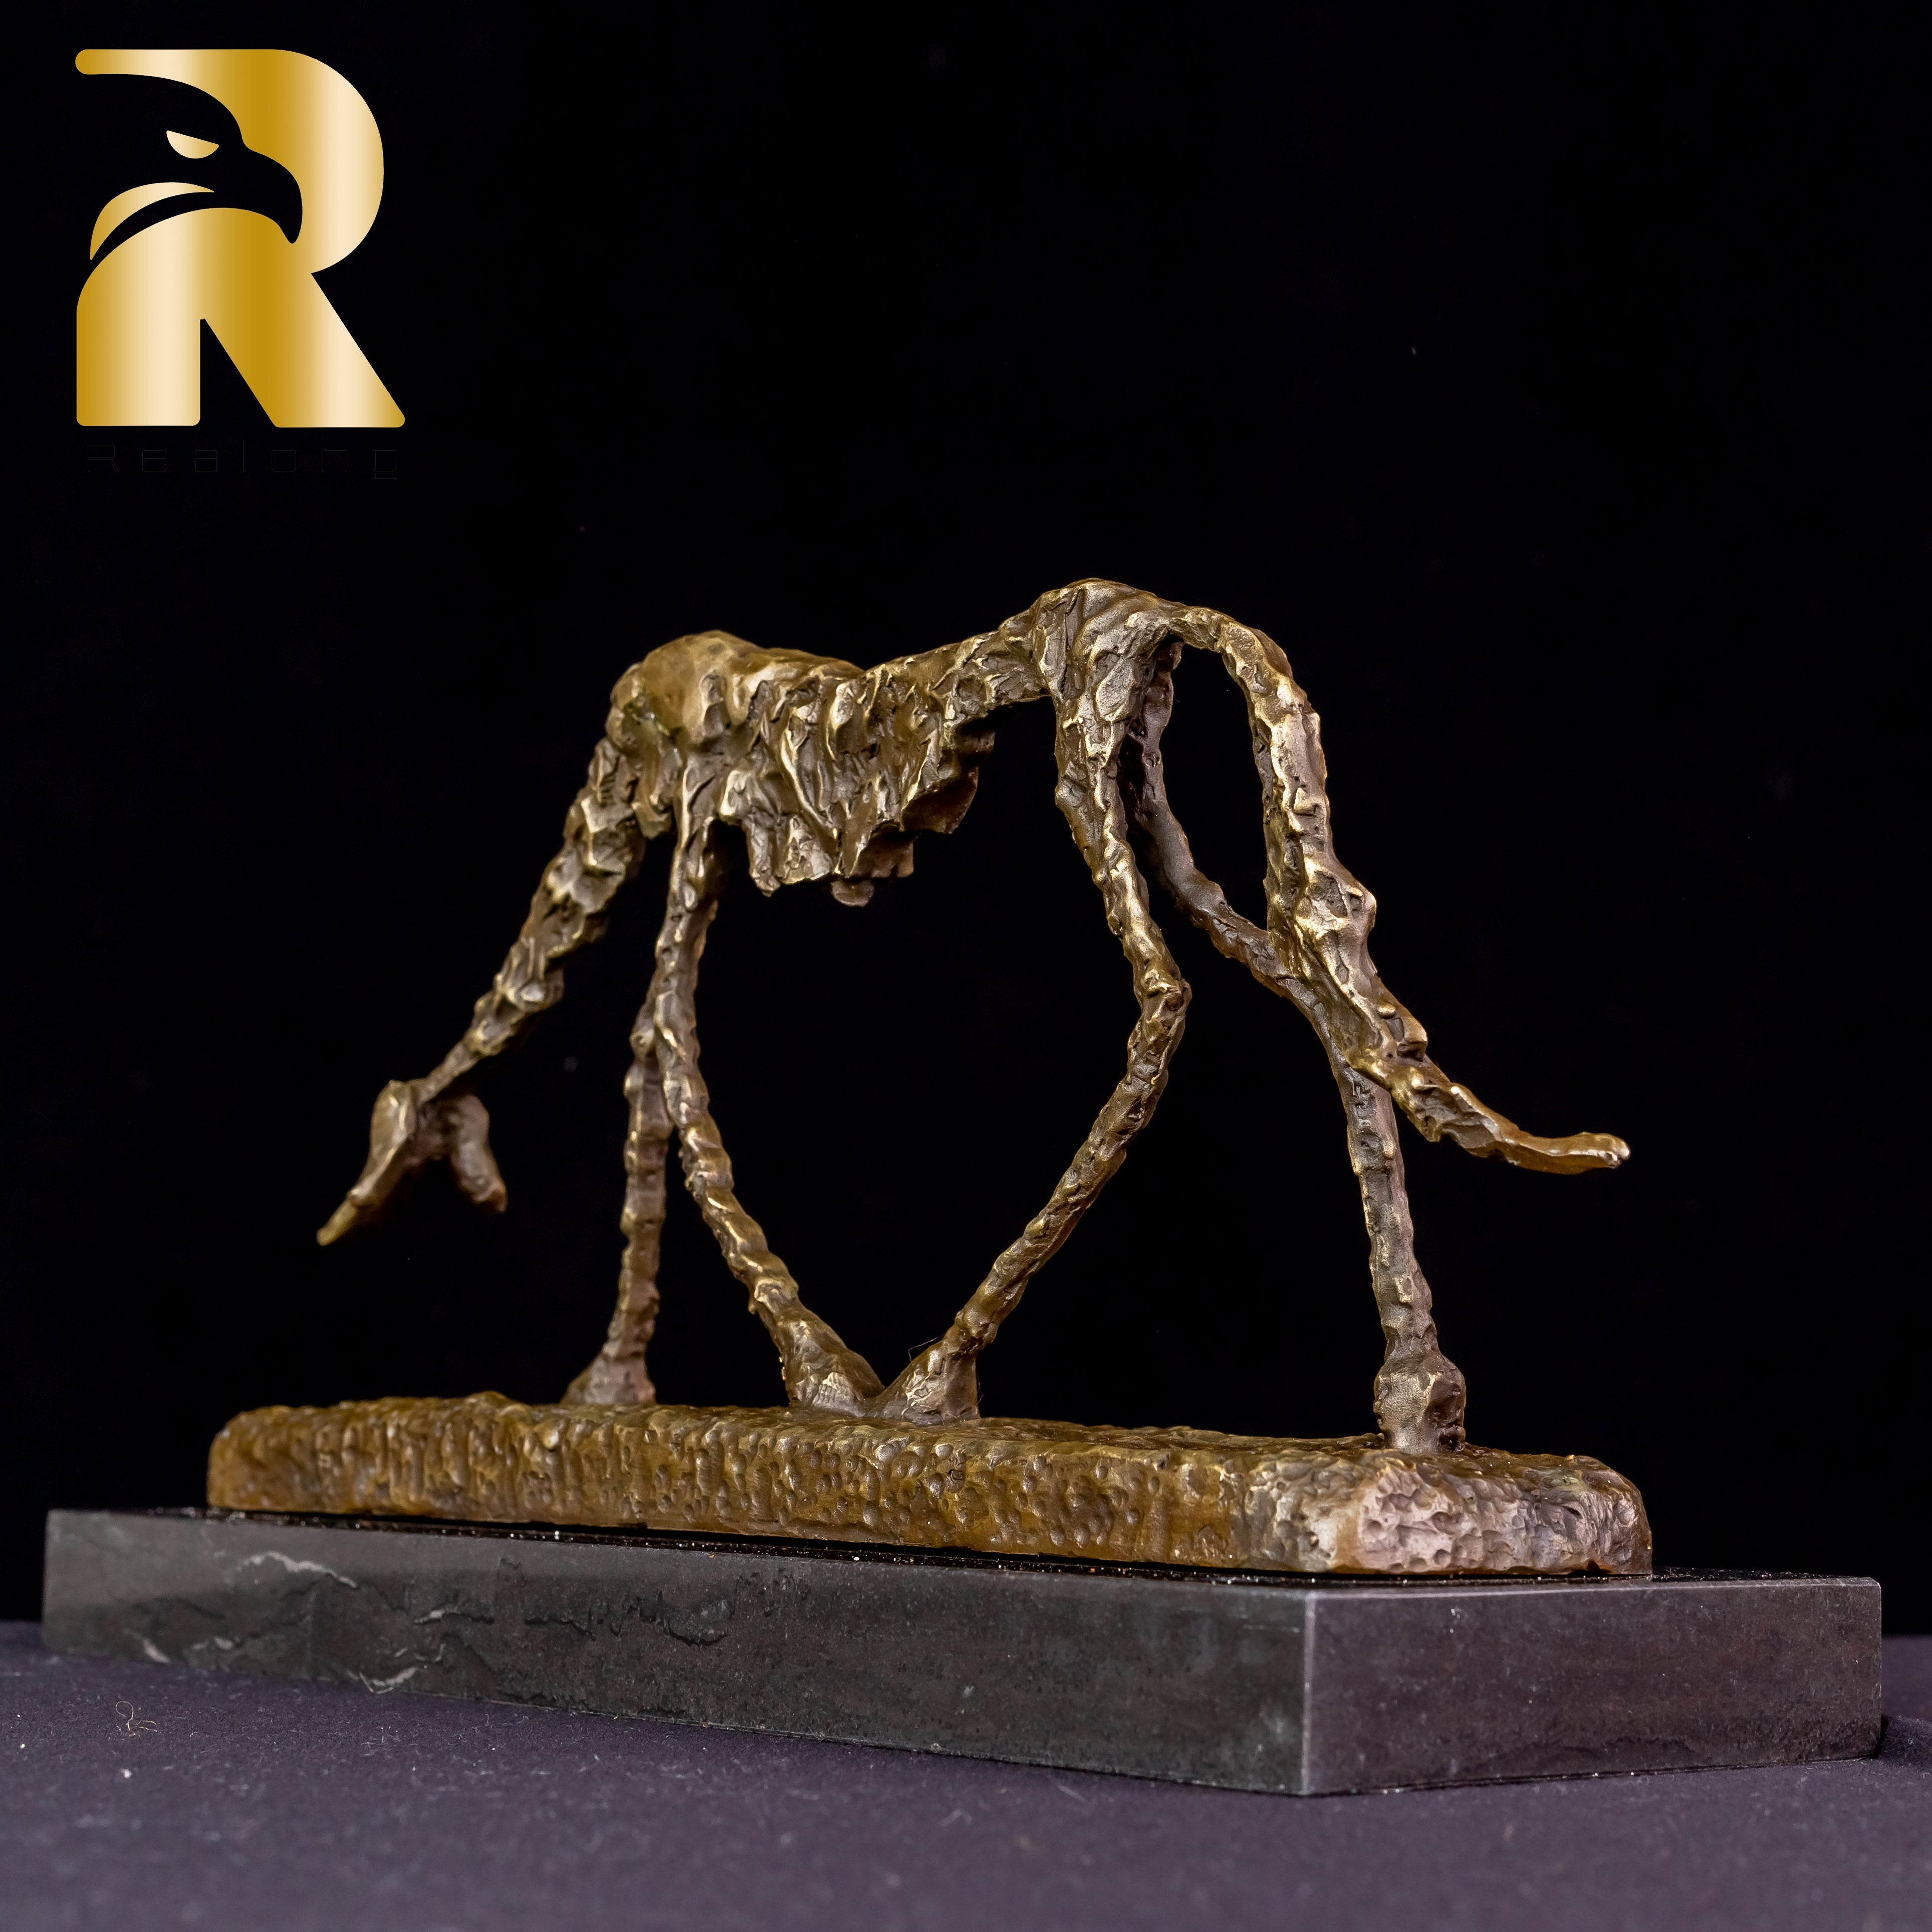 "The Dog" Bronze Sculpture Replica by Alberto Giacometti - Famous Abstract Bronze Animal Sculpture-Iconic Modern Art Statue for Home Decor and Collectors